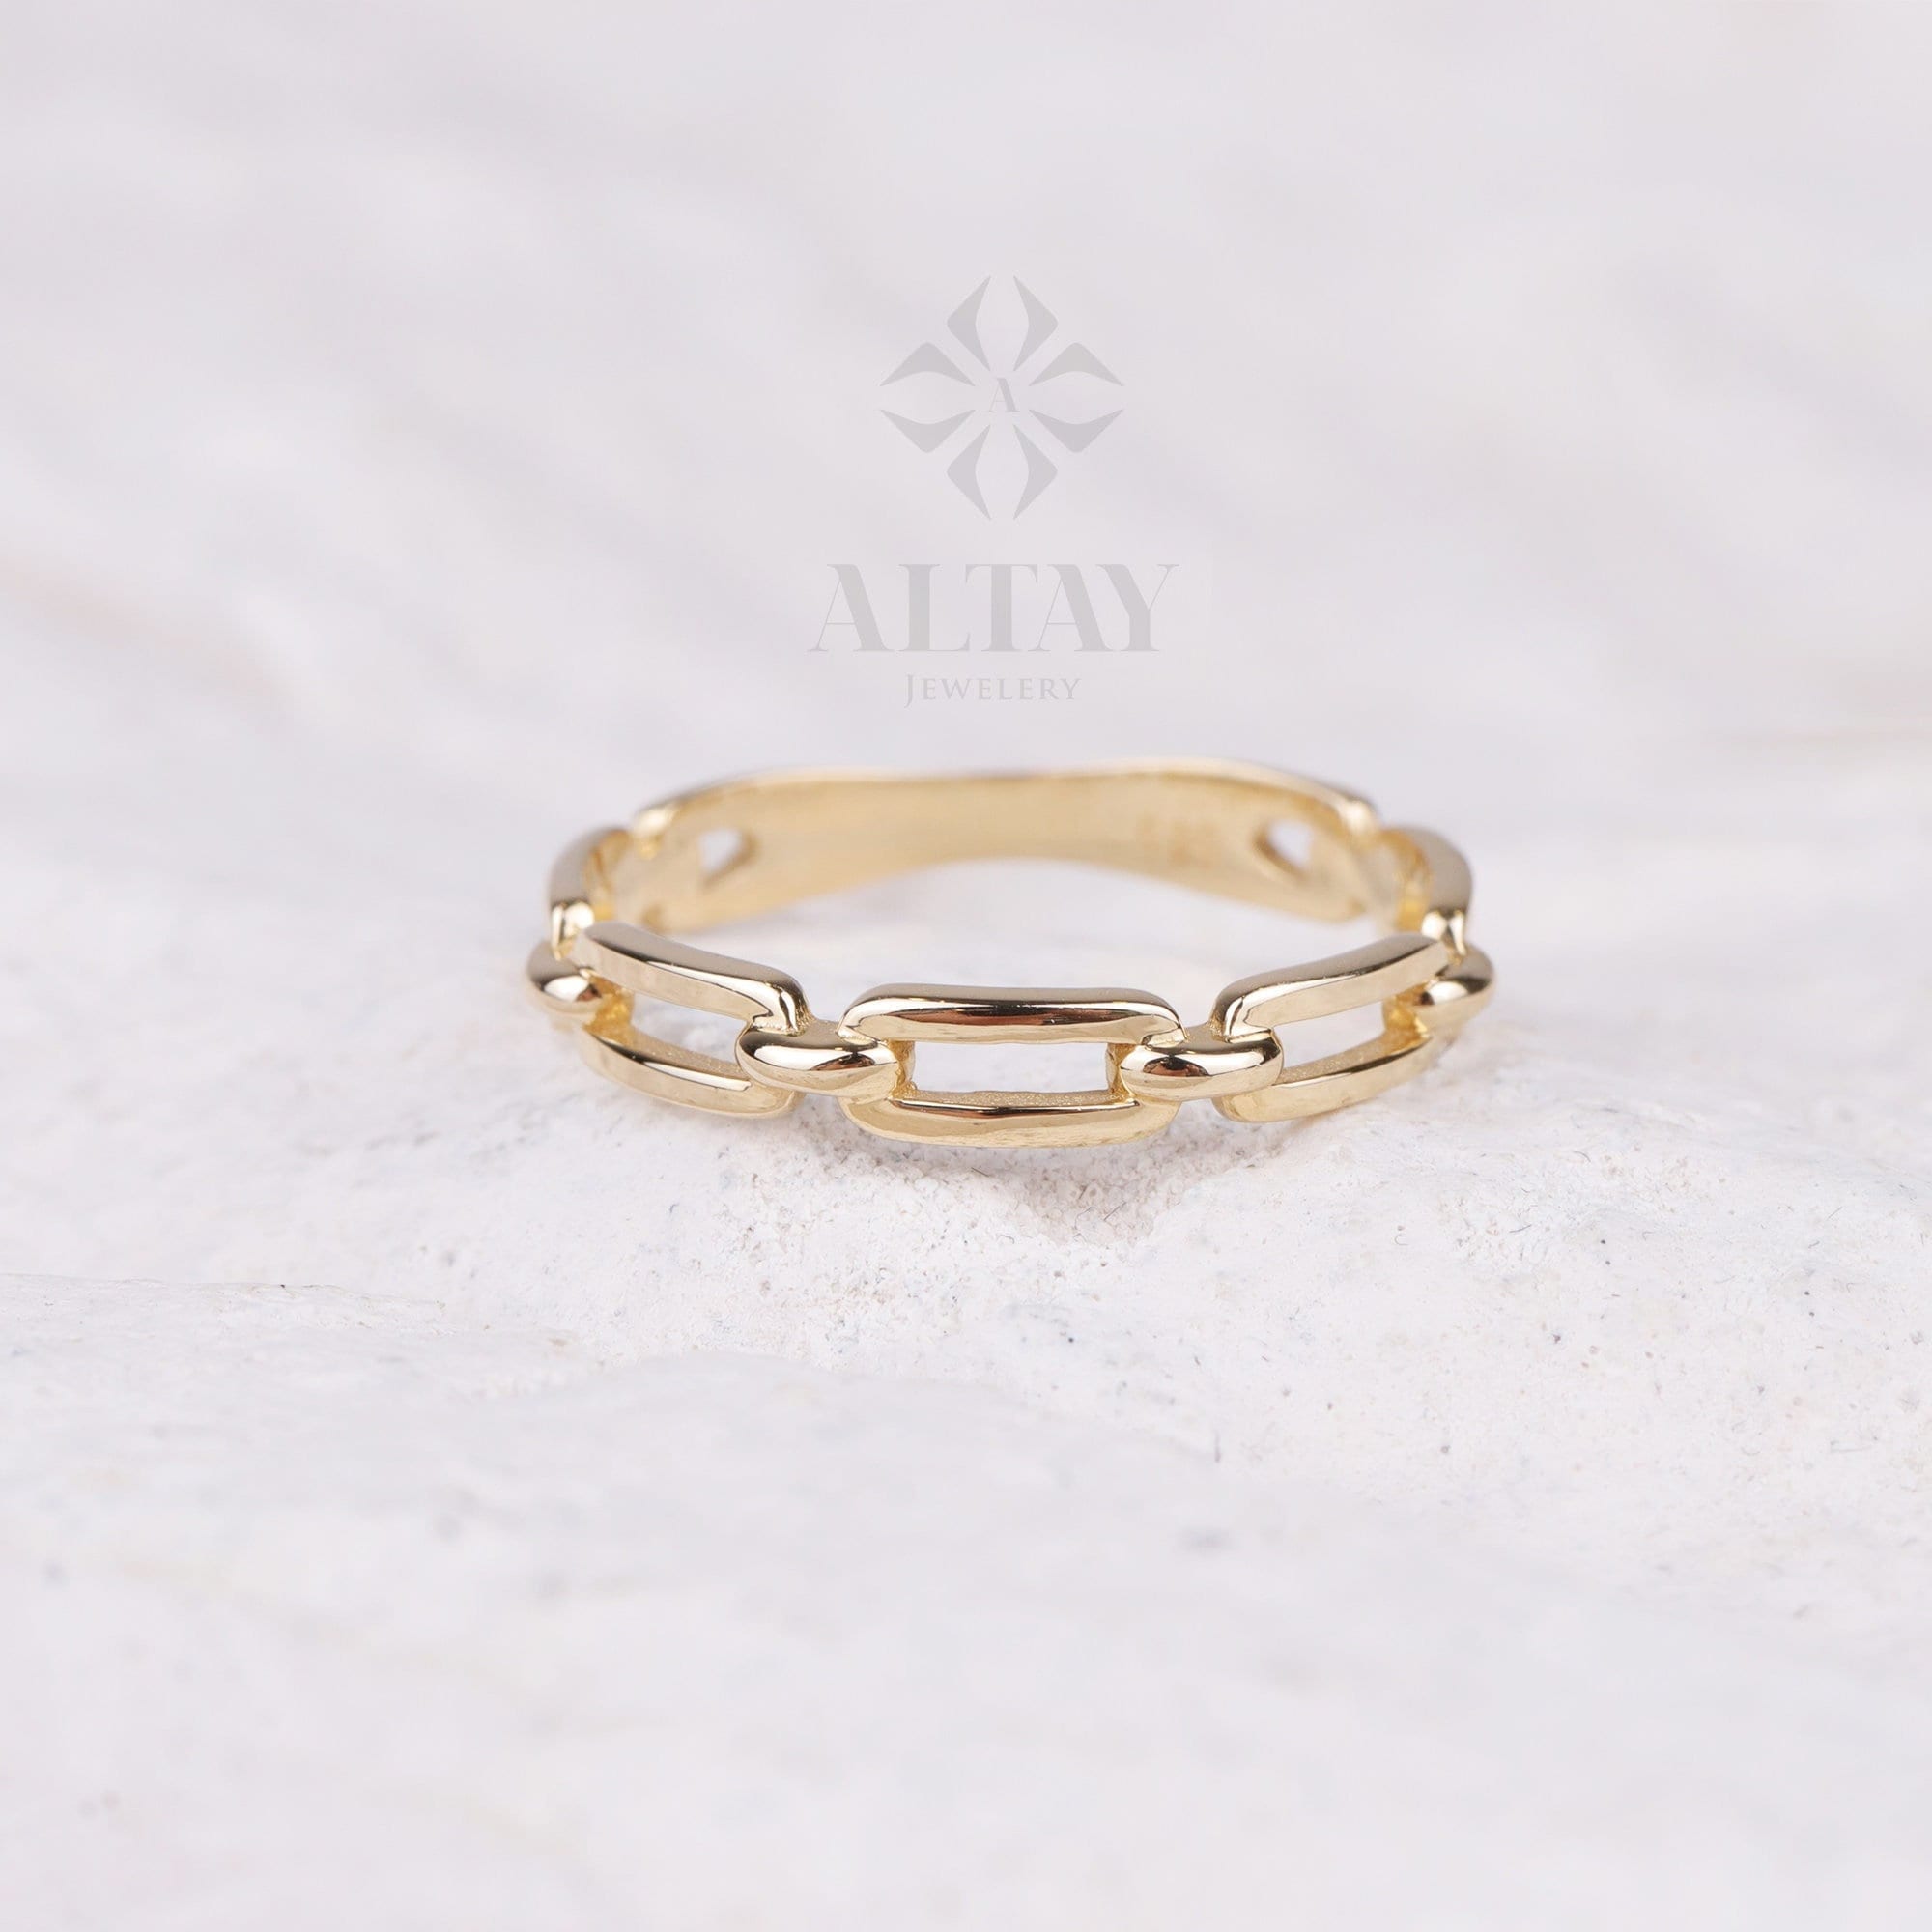 14K Gold Paperclip Chain Ring, Gold Chain Link Ring, Pointer Finger Ring, Stacking Ring for Women, Minimalist Wedding Ring, Handmade Band